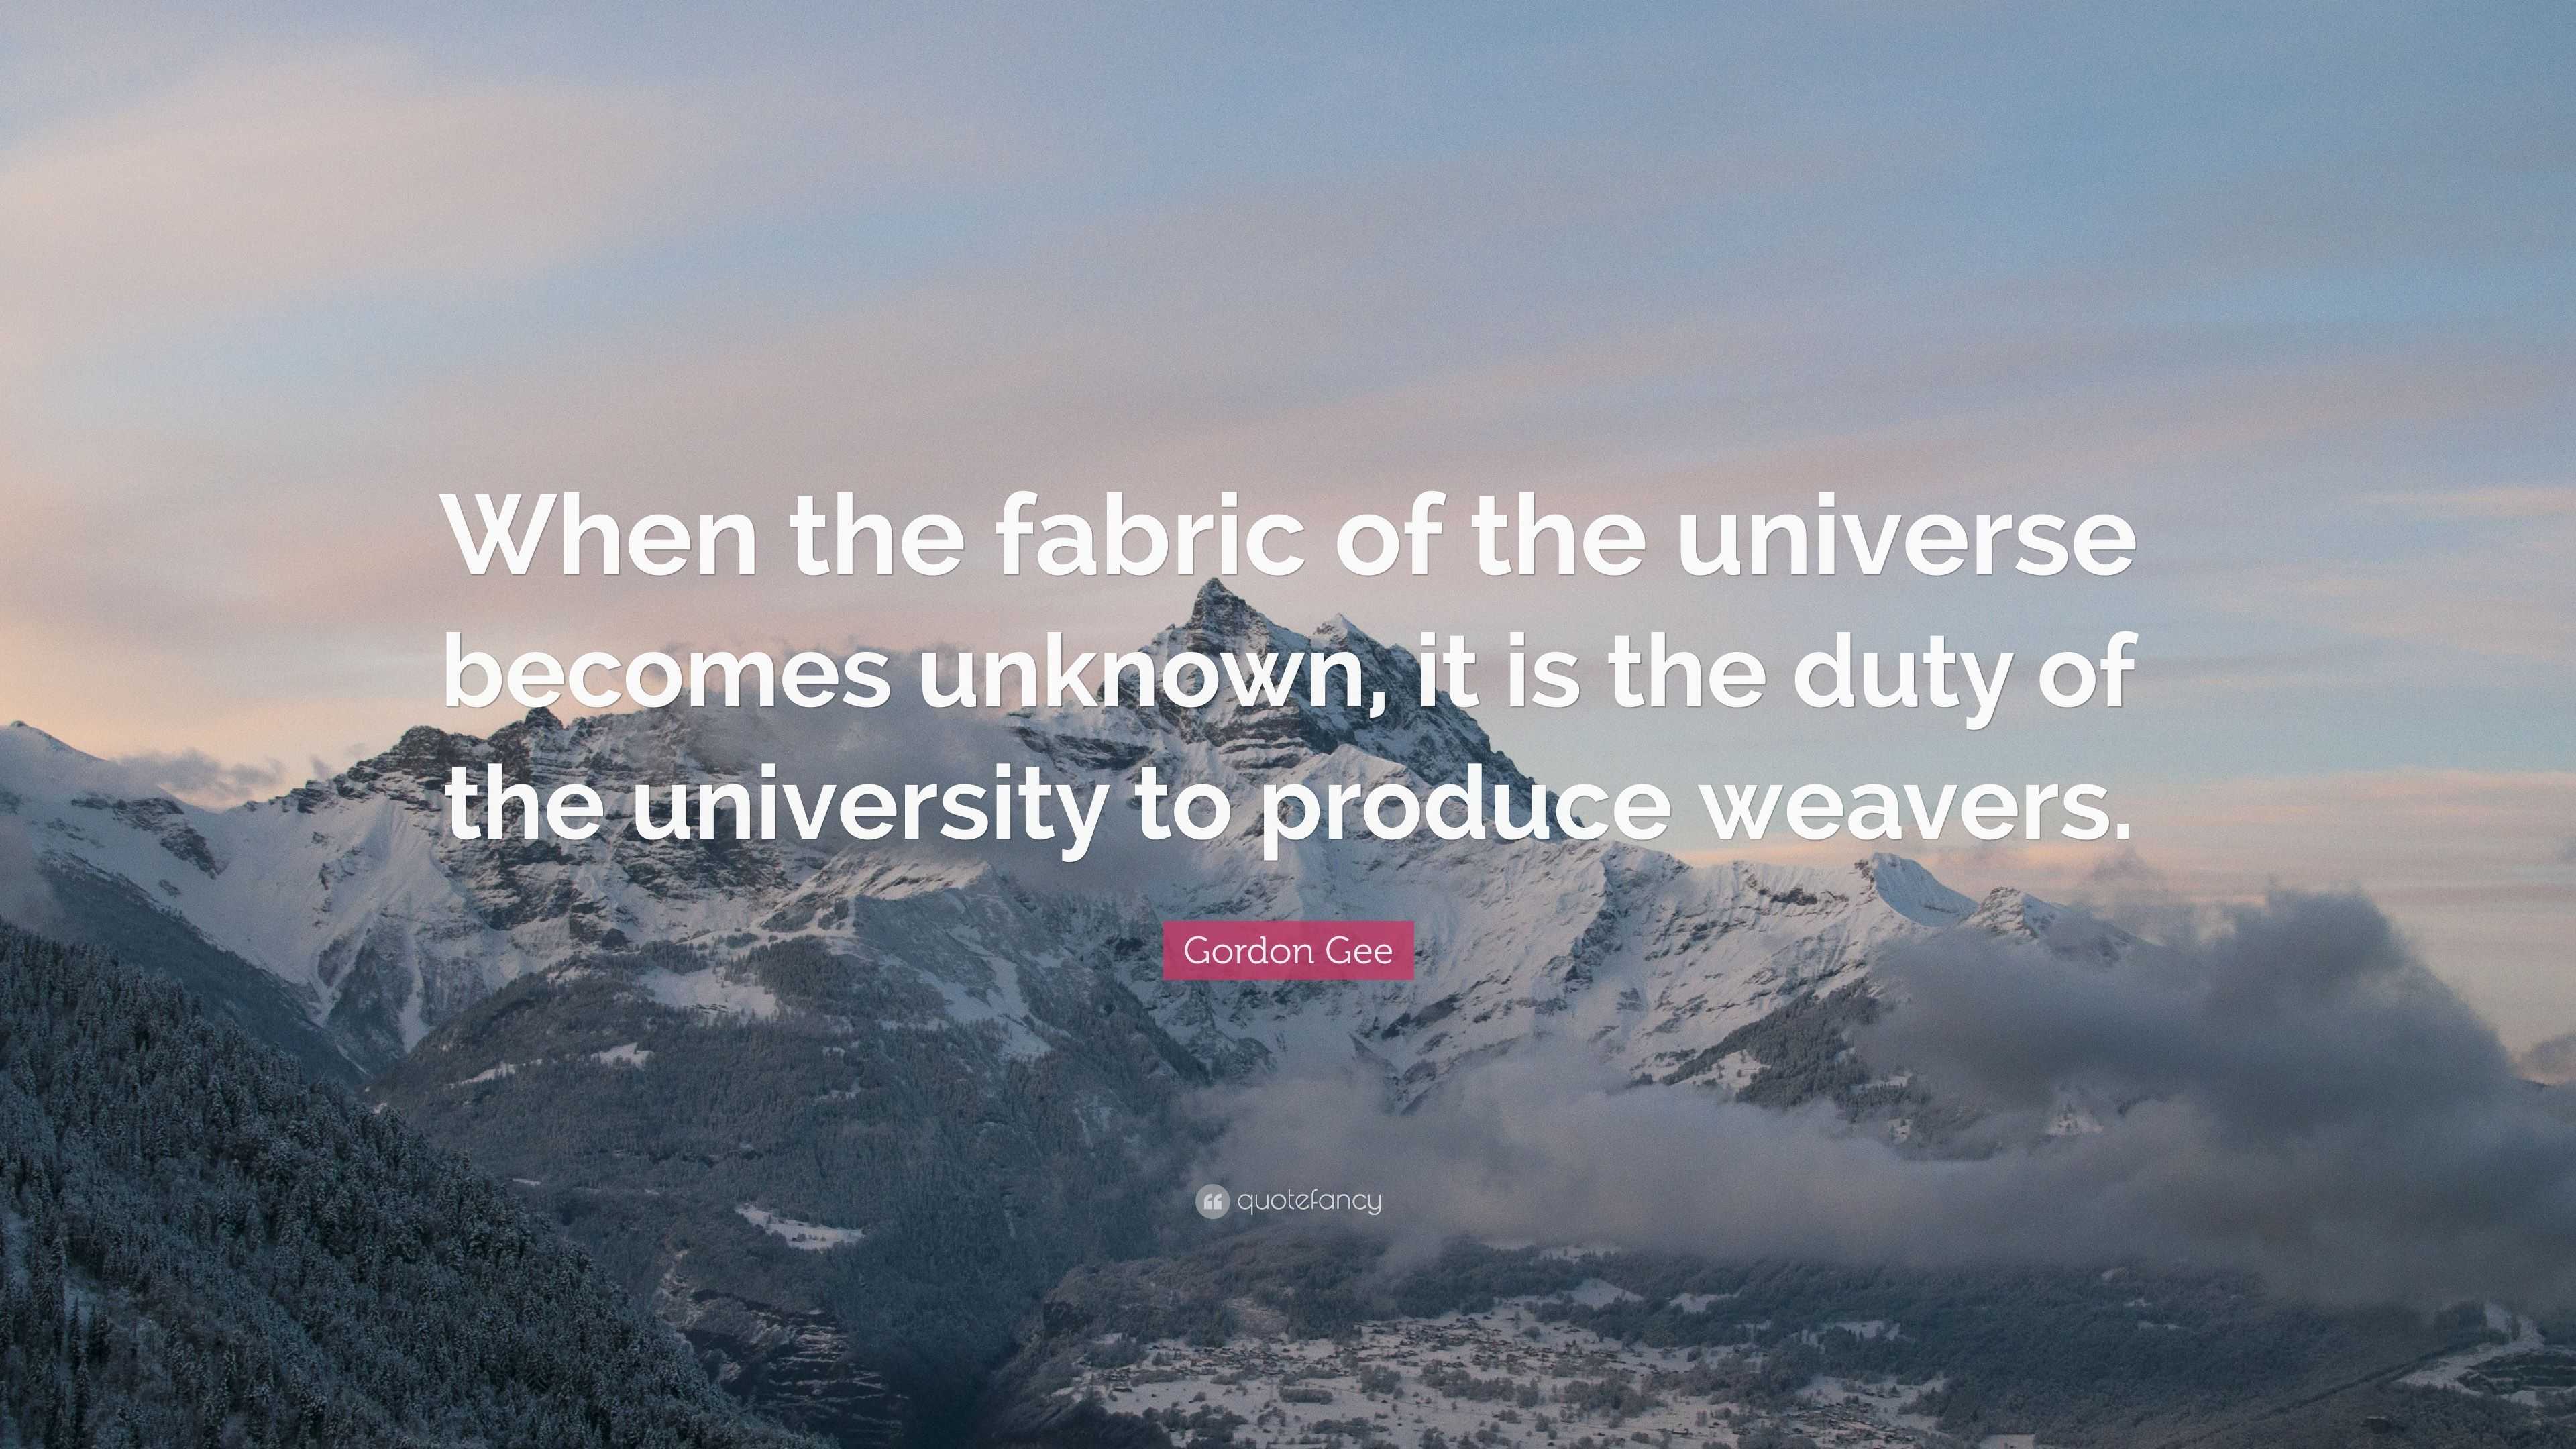 Gordon Gee Quote: “When the fabric of the universe becomes unknown, it is  the duty of